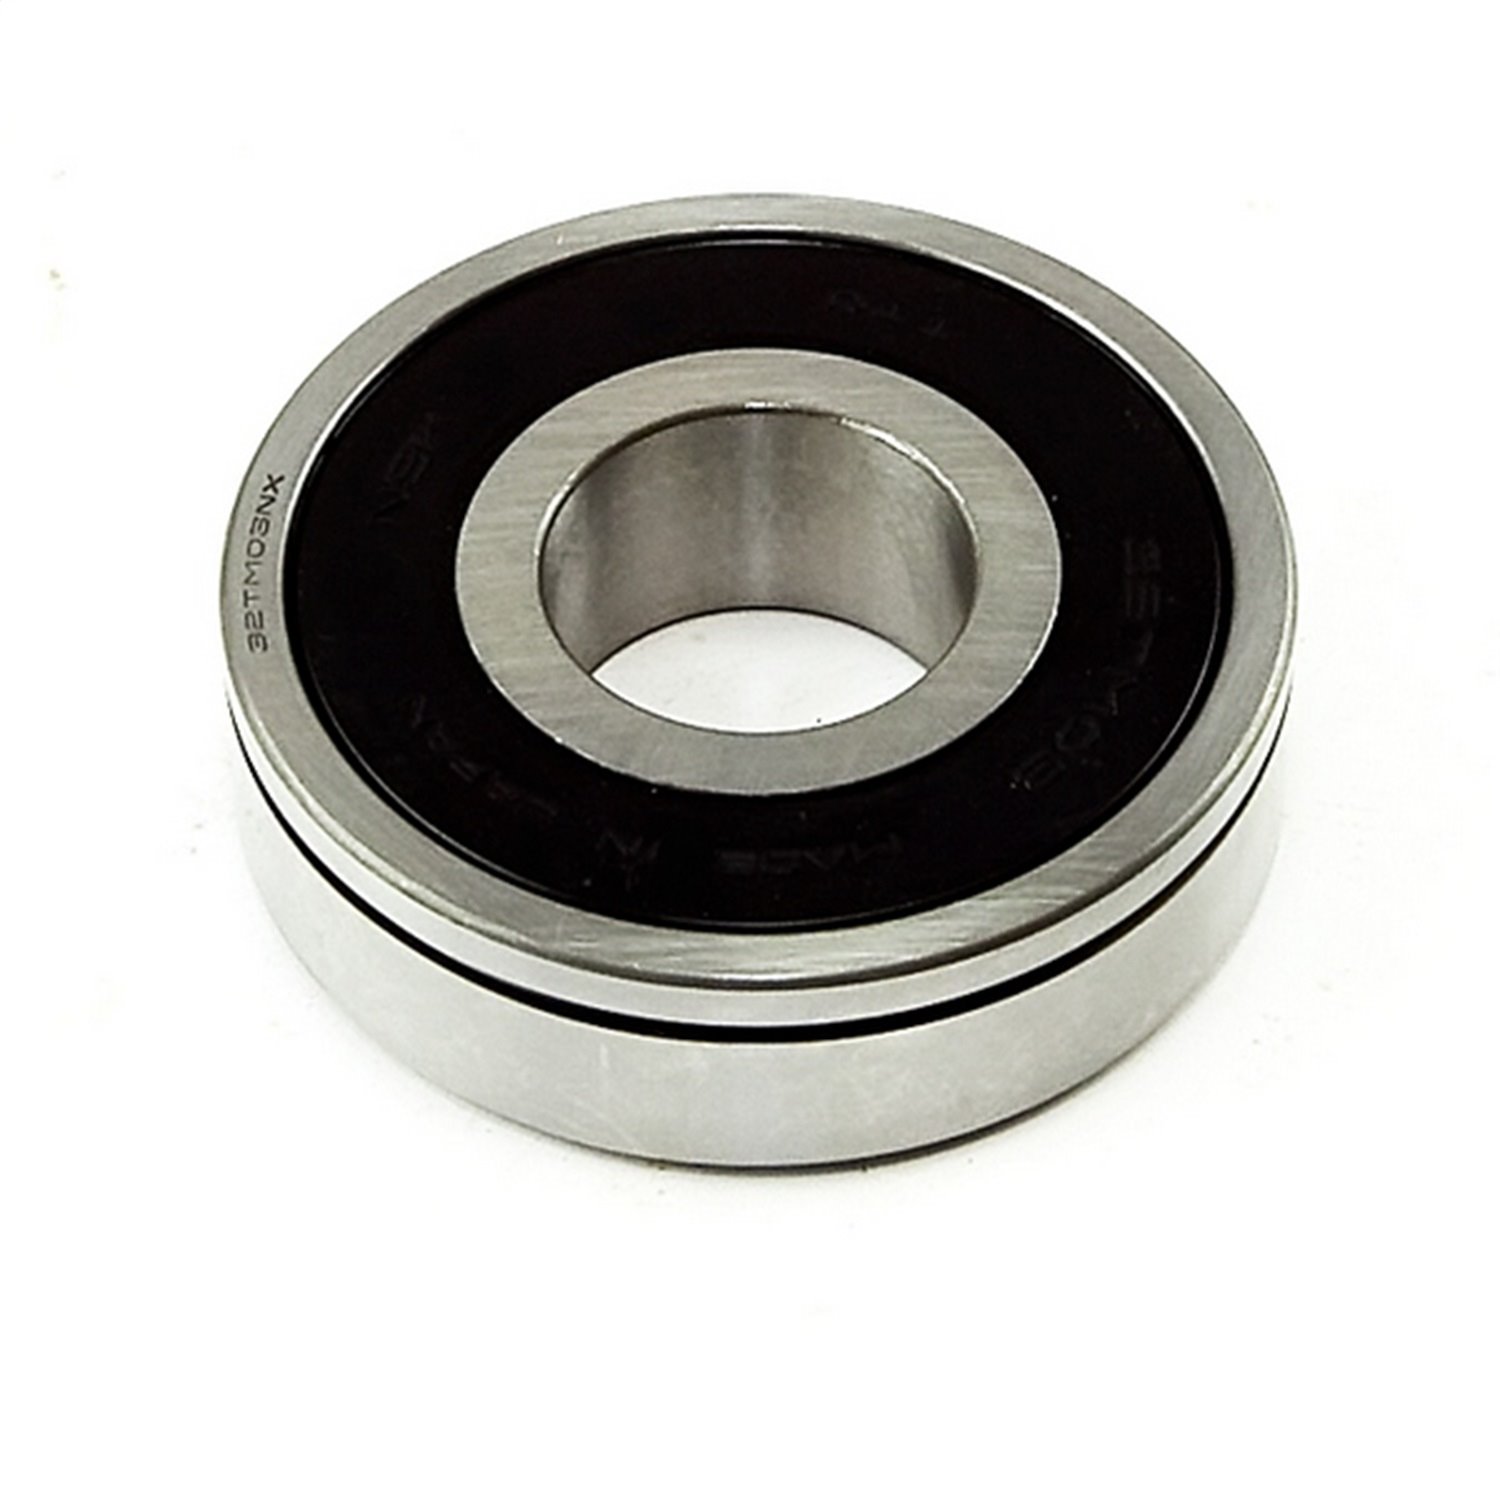 AX5 Front Bearing 1987-2002 Jeep Wrangler By Omix-ADA